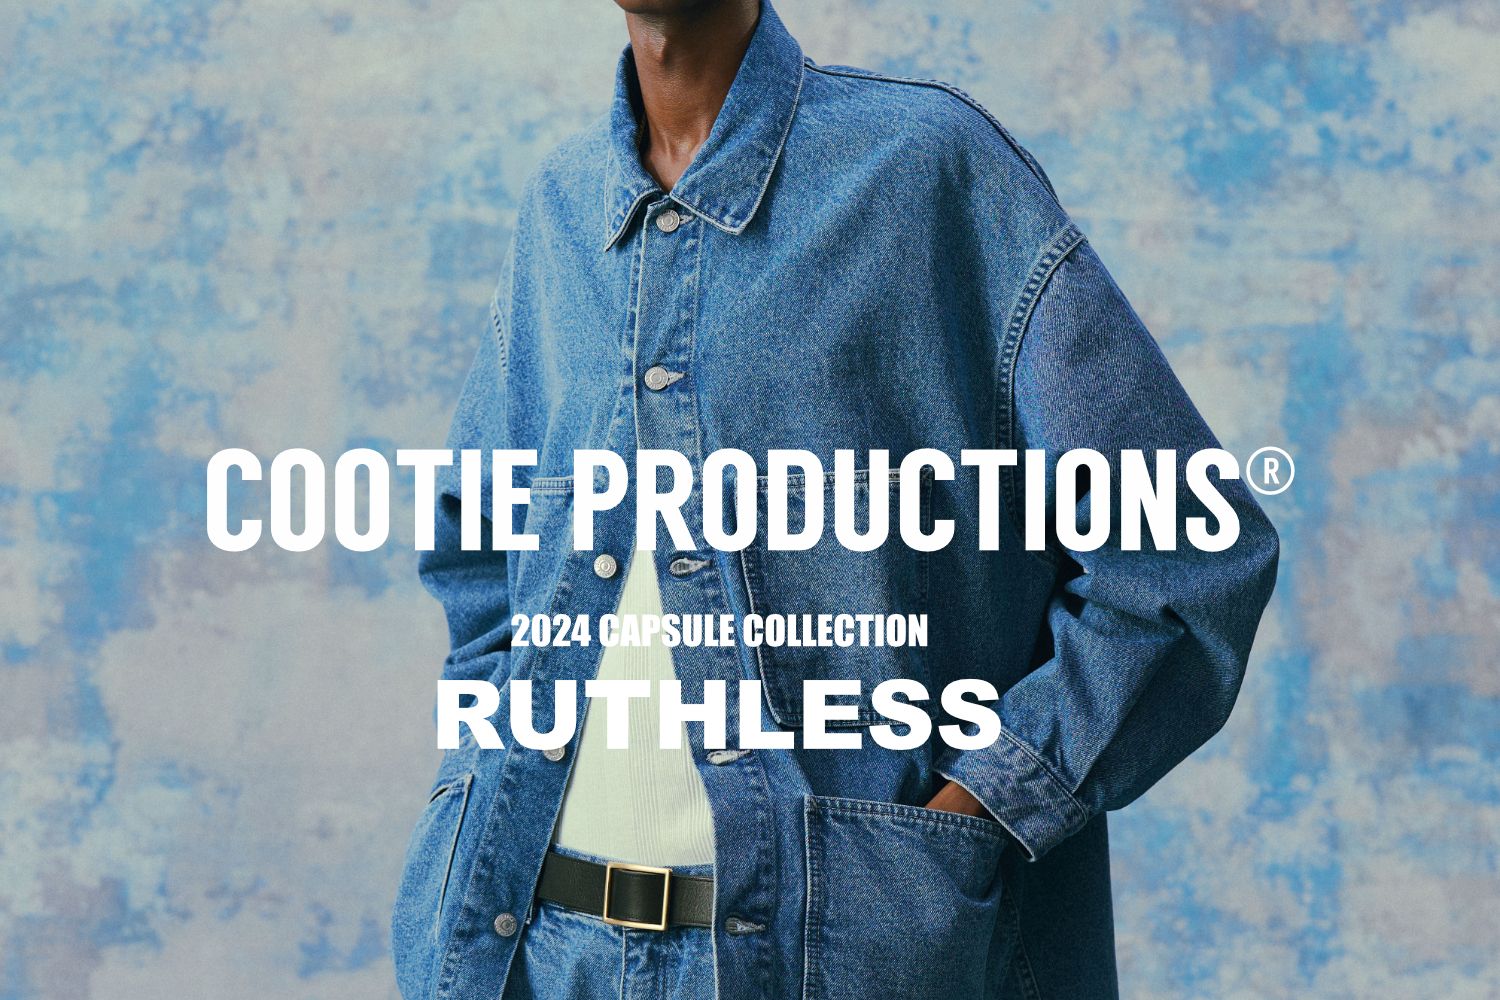 COOTIE PRODUCTIONS 2024 CAPSULE COLLECTION / RUTHLESS | LOOPHOLE